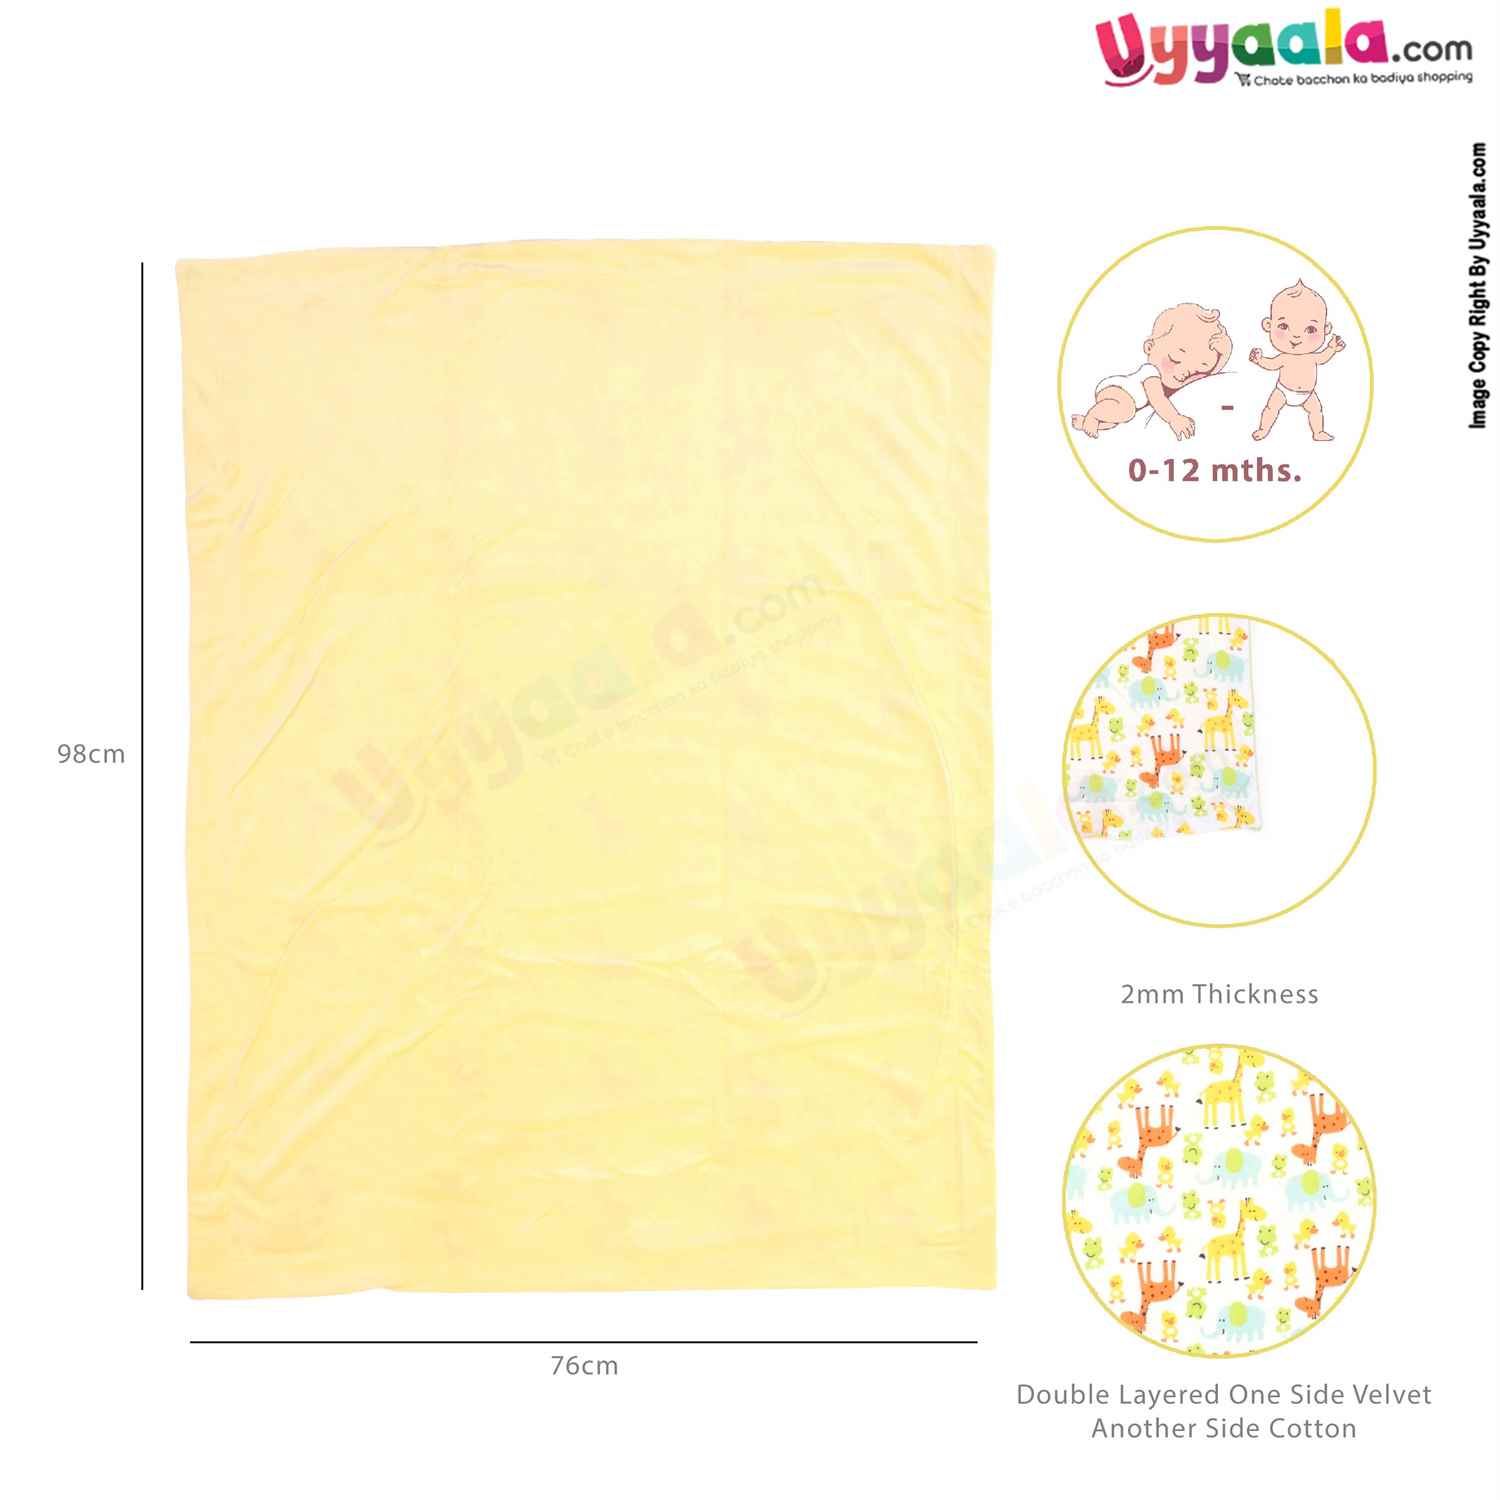 Eberry Double Layered Wrapper One Side Velvet & Another Side Cotton with Animals Print for Babies 0-12m Age, Size(98*76cm)-white & Yellow